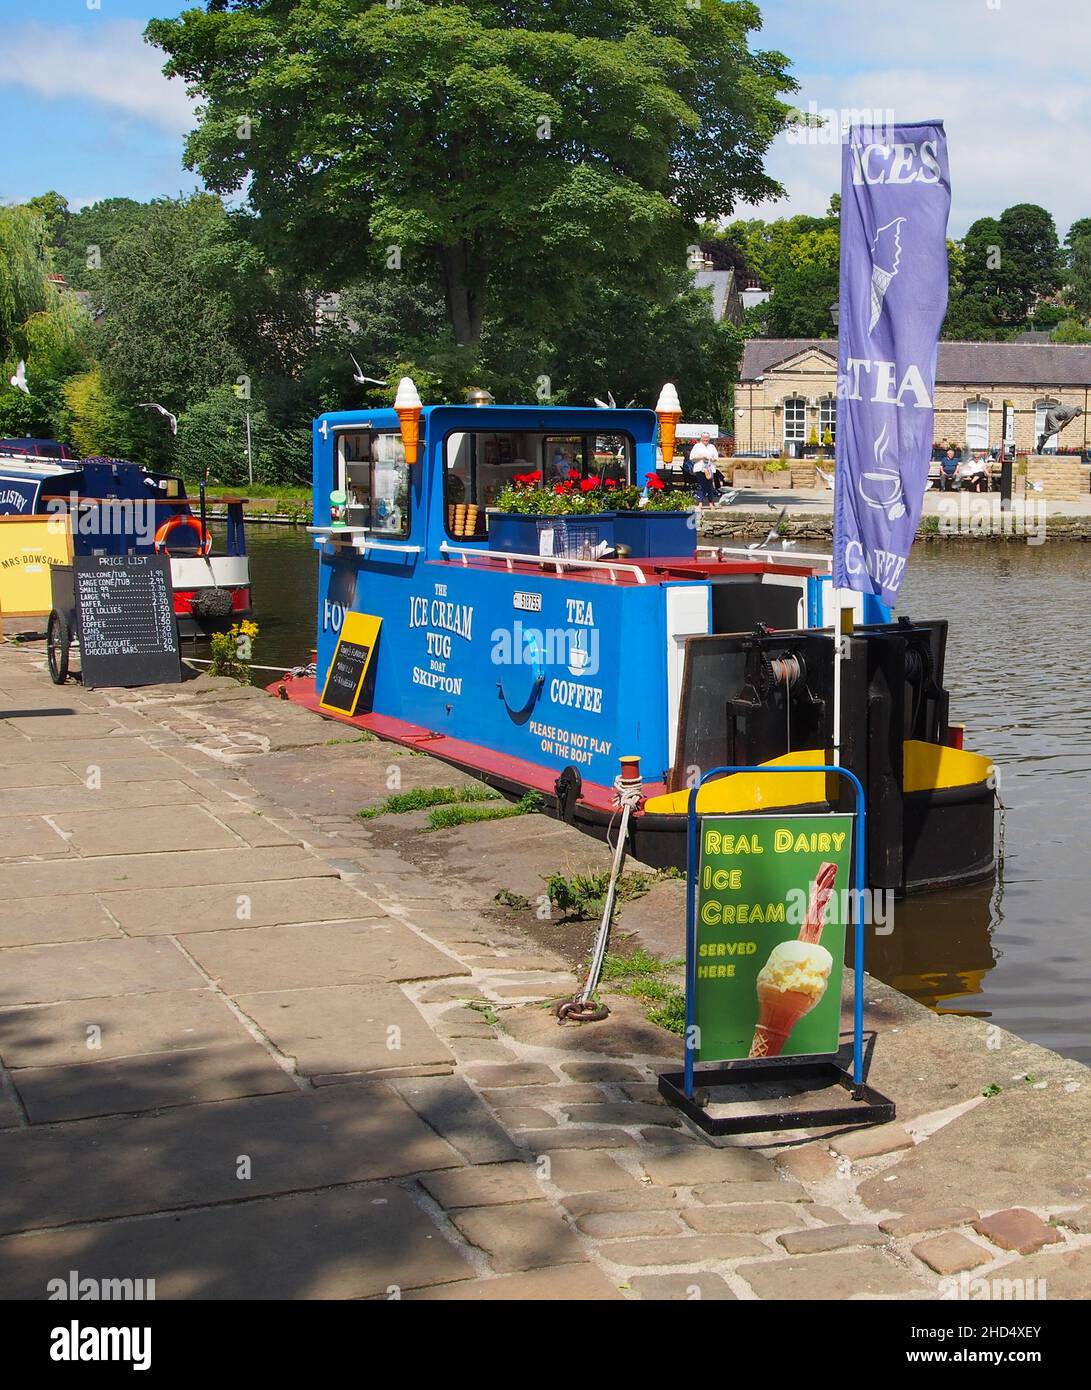 The ice cream boat moored in the sunshine at the canal basin on the Leeds and Liverpool canal in Skipton, North Yorkshire, England. Stock Photo